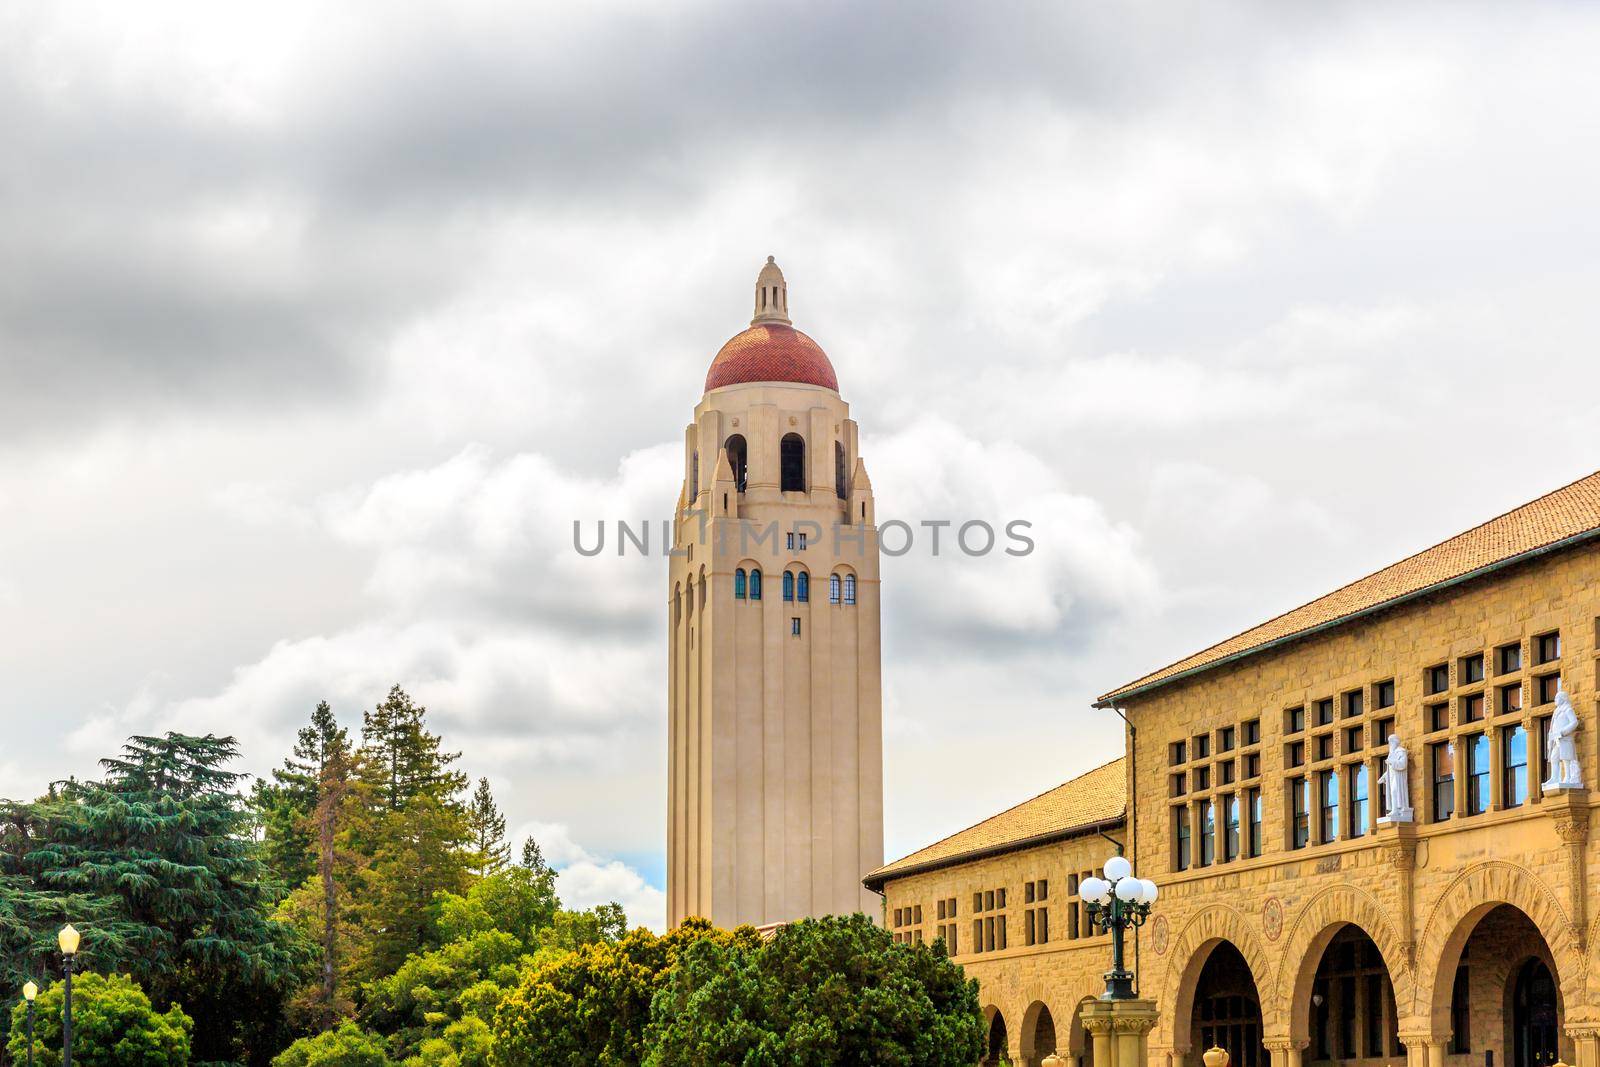 Stanford, California, USA, May 26, 2013: The famous Stanford University campus with Hoover Tower located near Palo Alto, California.